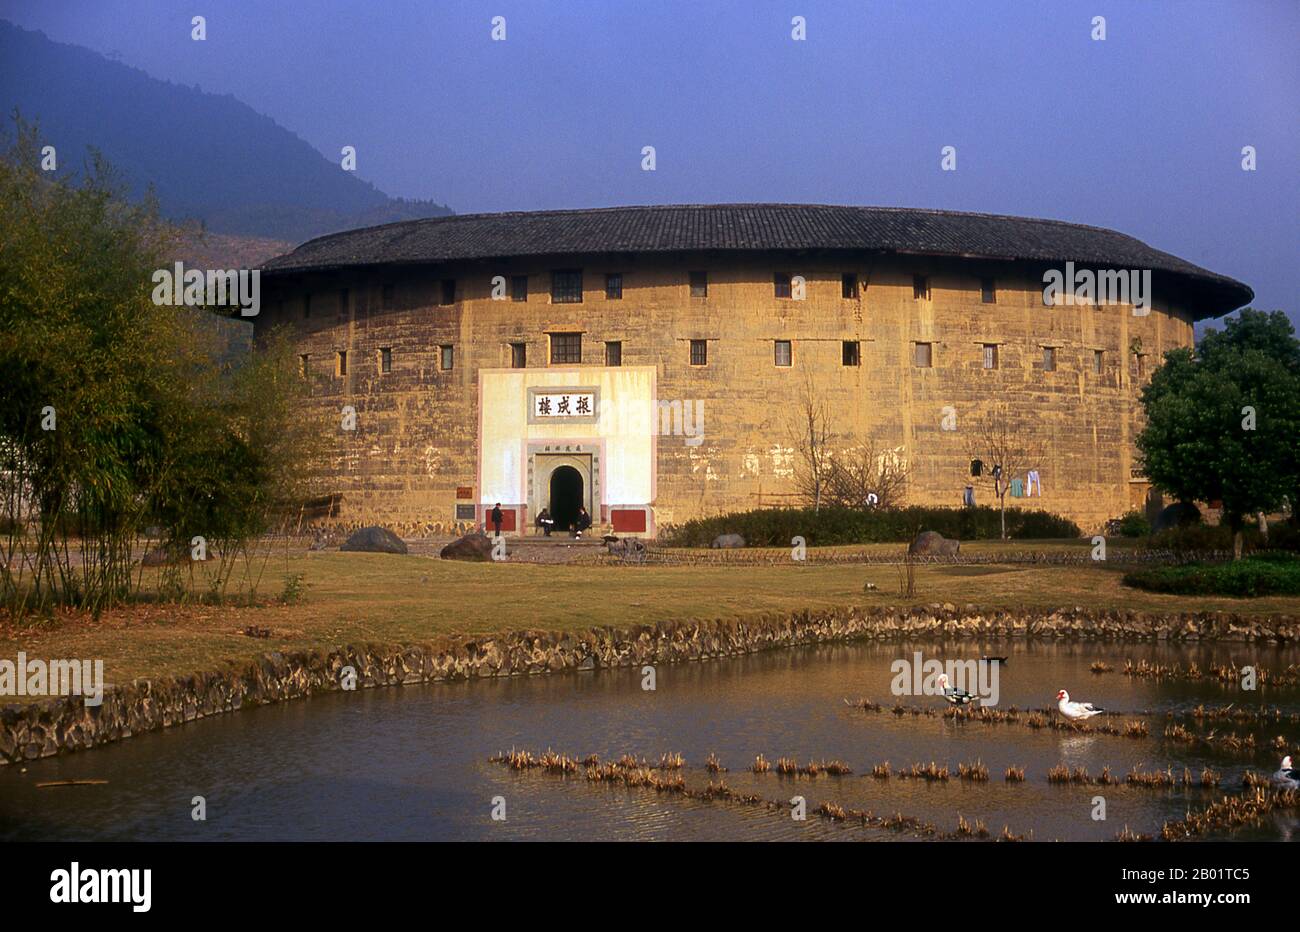 China: Zhenchang Lou Hakka Tower near Hukeng, Yongding County, Fujian Province.  The Hakka (kejia in Mandarin; literally 'guest people') are Han Chinese who speak the Hakka language. Their distinctive earthen houses or tulou can be found in the borderland counties where Guangdong, Jiangxi and Fujian provinces meet.  Communal entities, tulou are fortified against marauding bandits and generally made of compacted earth, bamboo, wood and stone. They contain many rooms on several storeys, so that several families can live together. Stock Photo